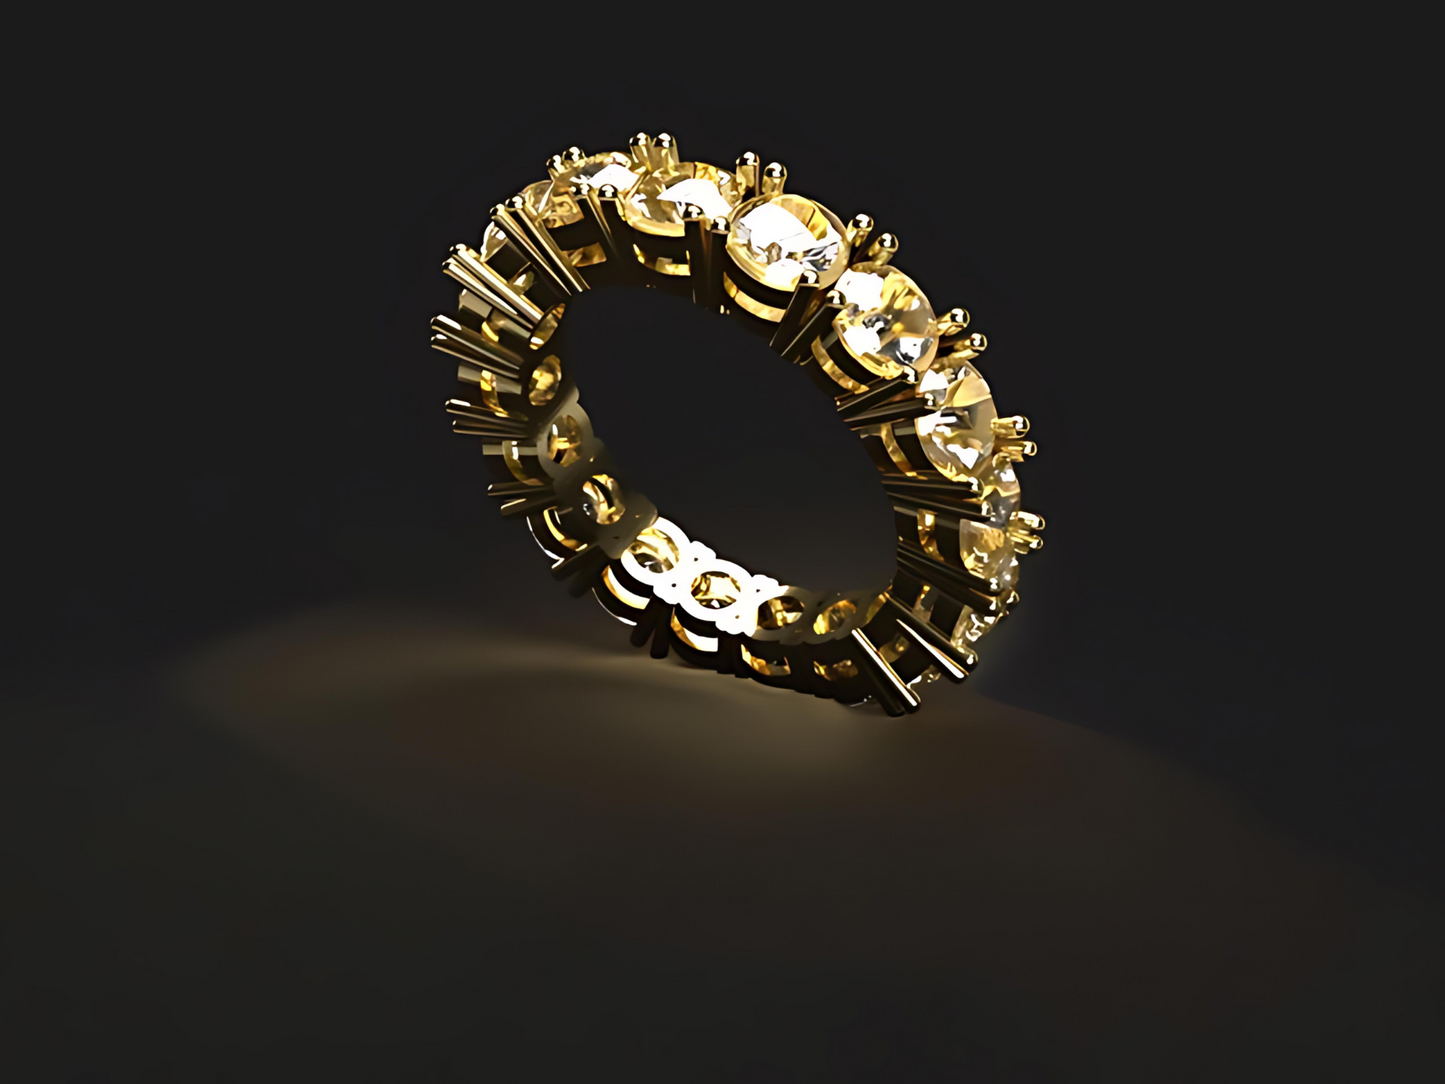 Handmade eternity gold ring with +2.1 ct. natural Vs high quality Diamonds. Engagement ring.